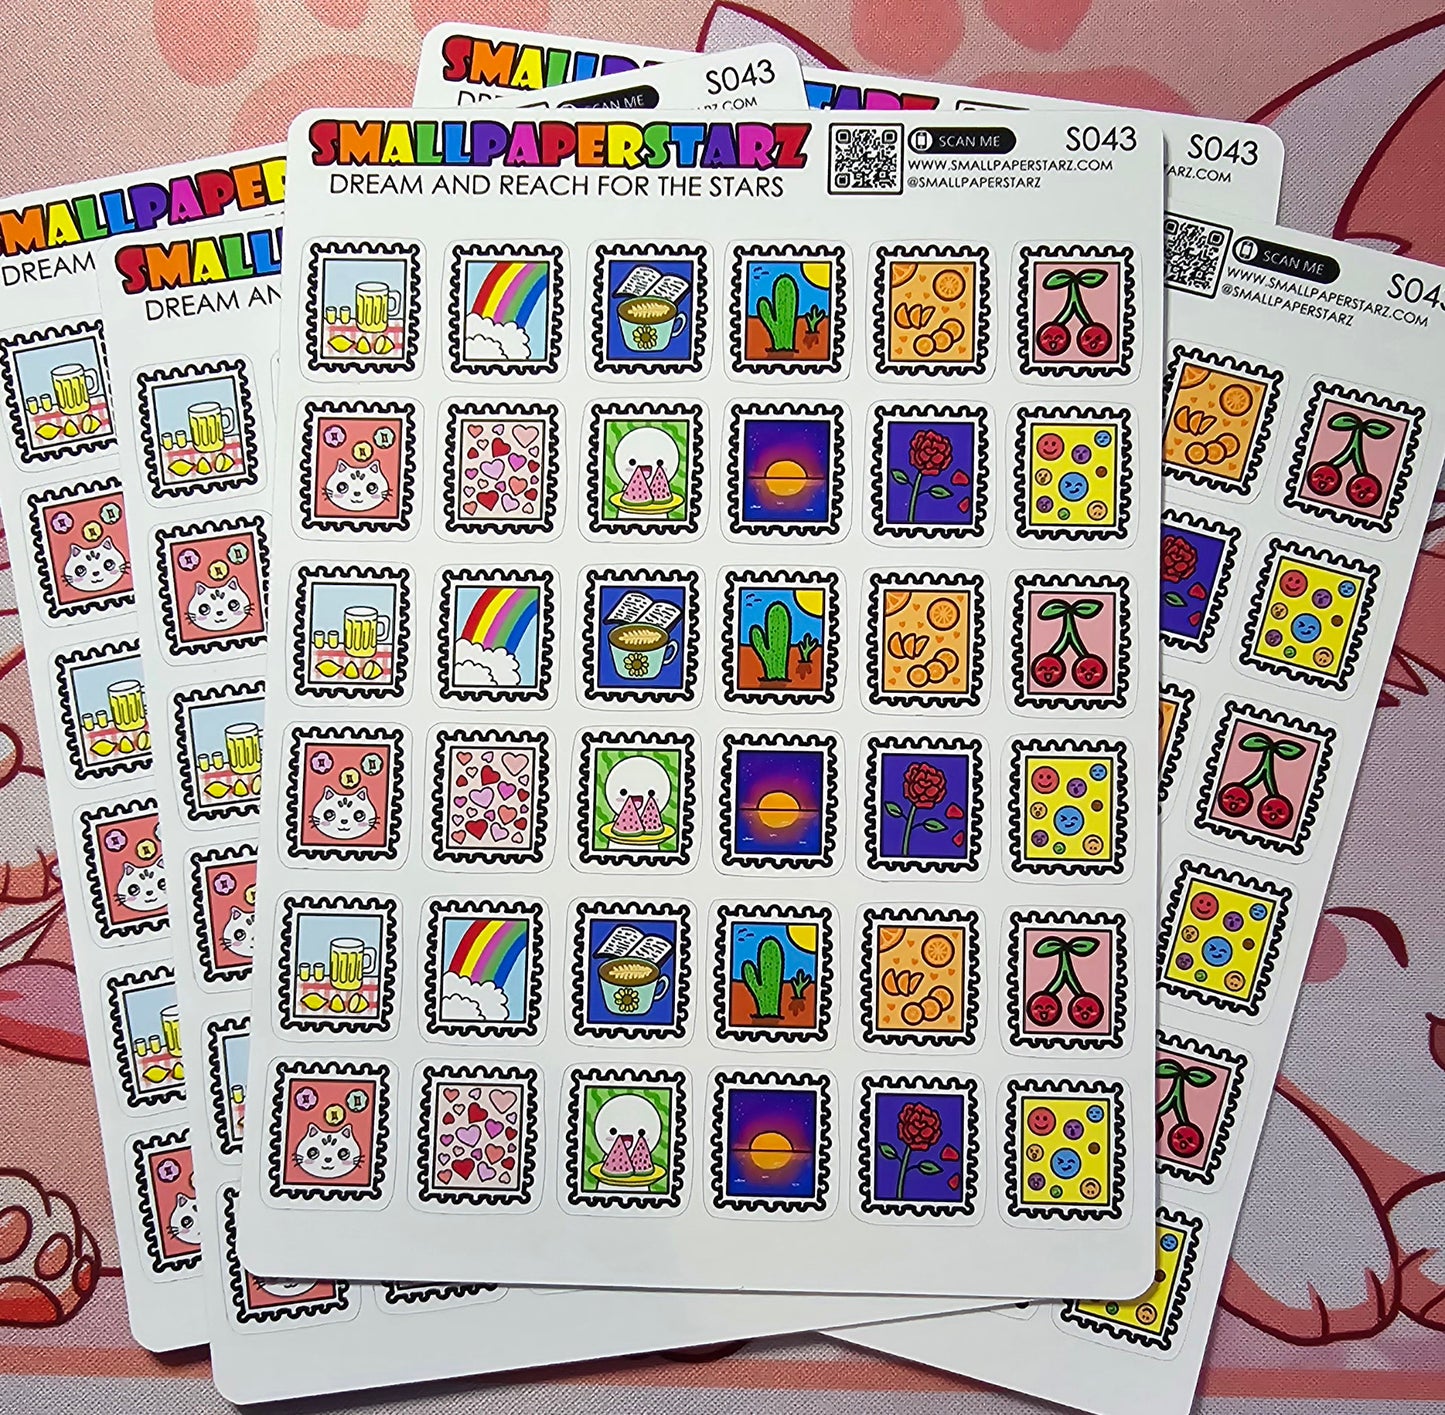 S043 - Stamps Sticker Sheet